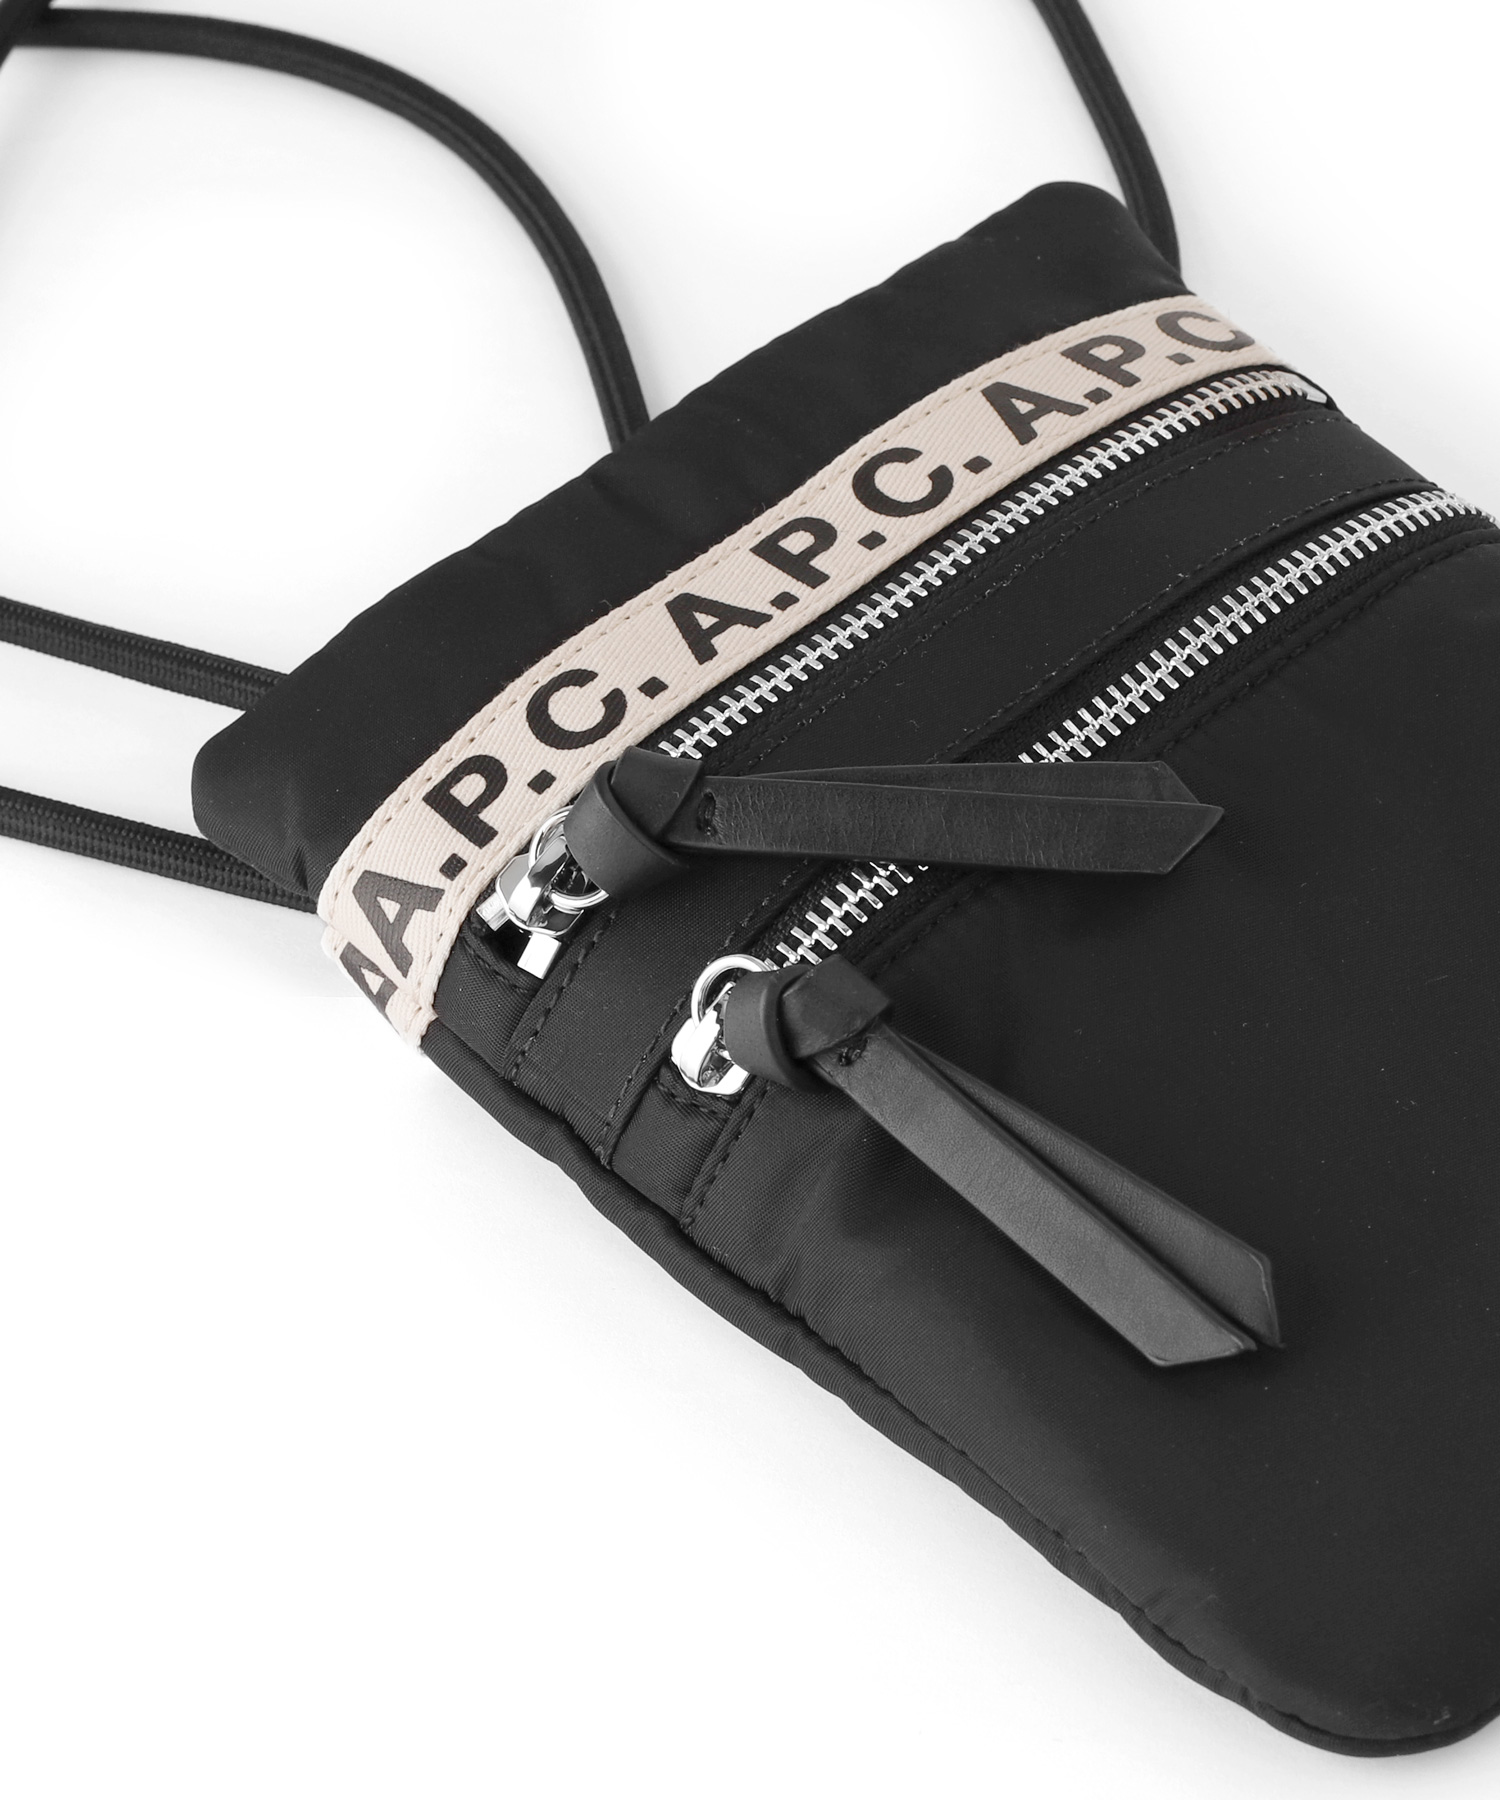 【A.P.C.】NECK POUCH REPEAT[ネックポーチ]